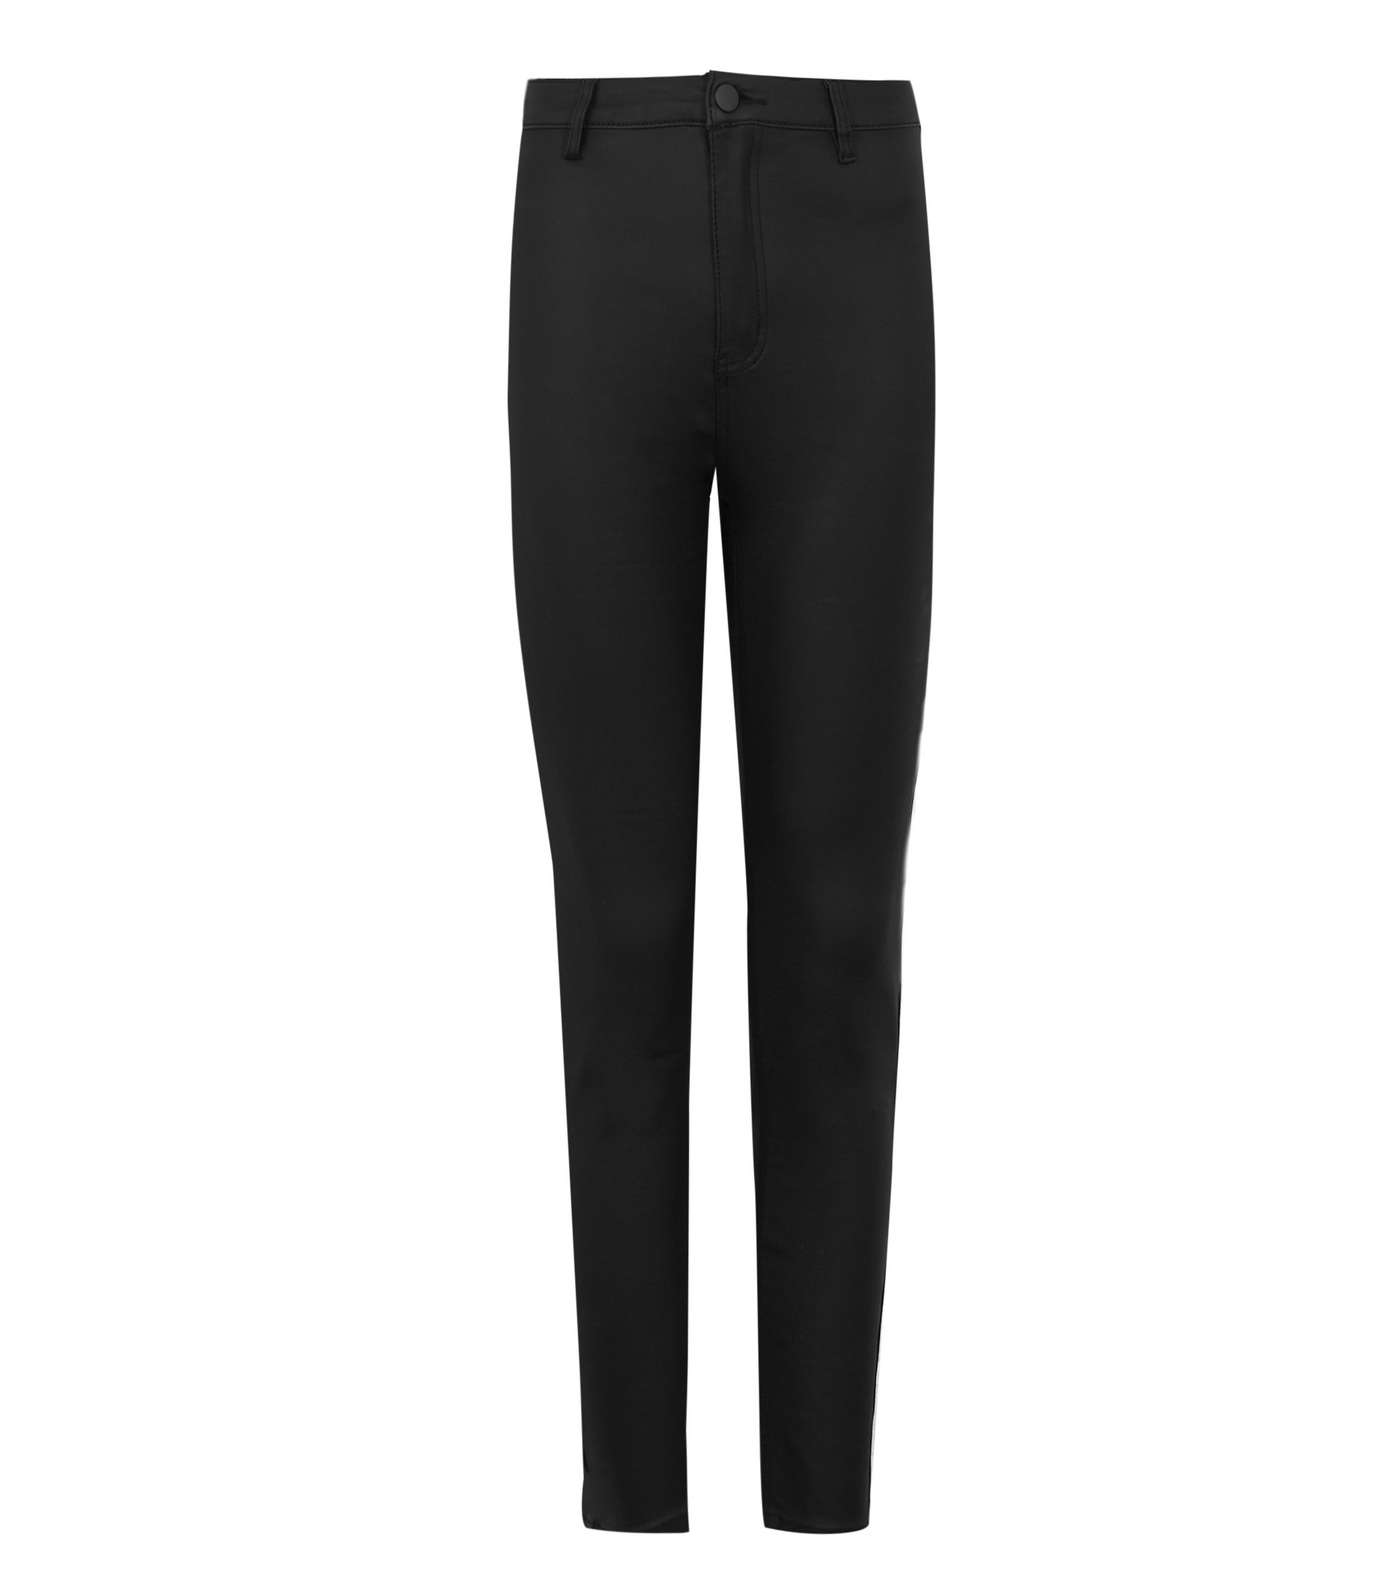 Urban Bliss Black Coated Leather-Look Skinny Jeans Image 5